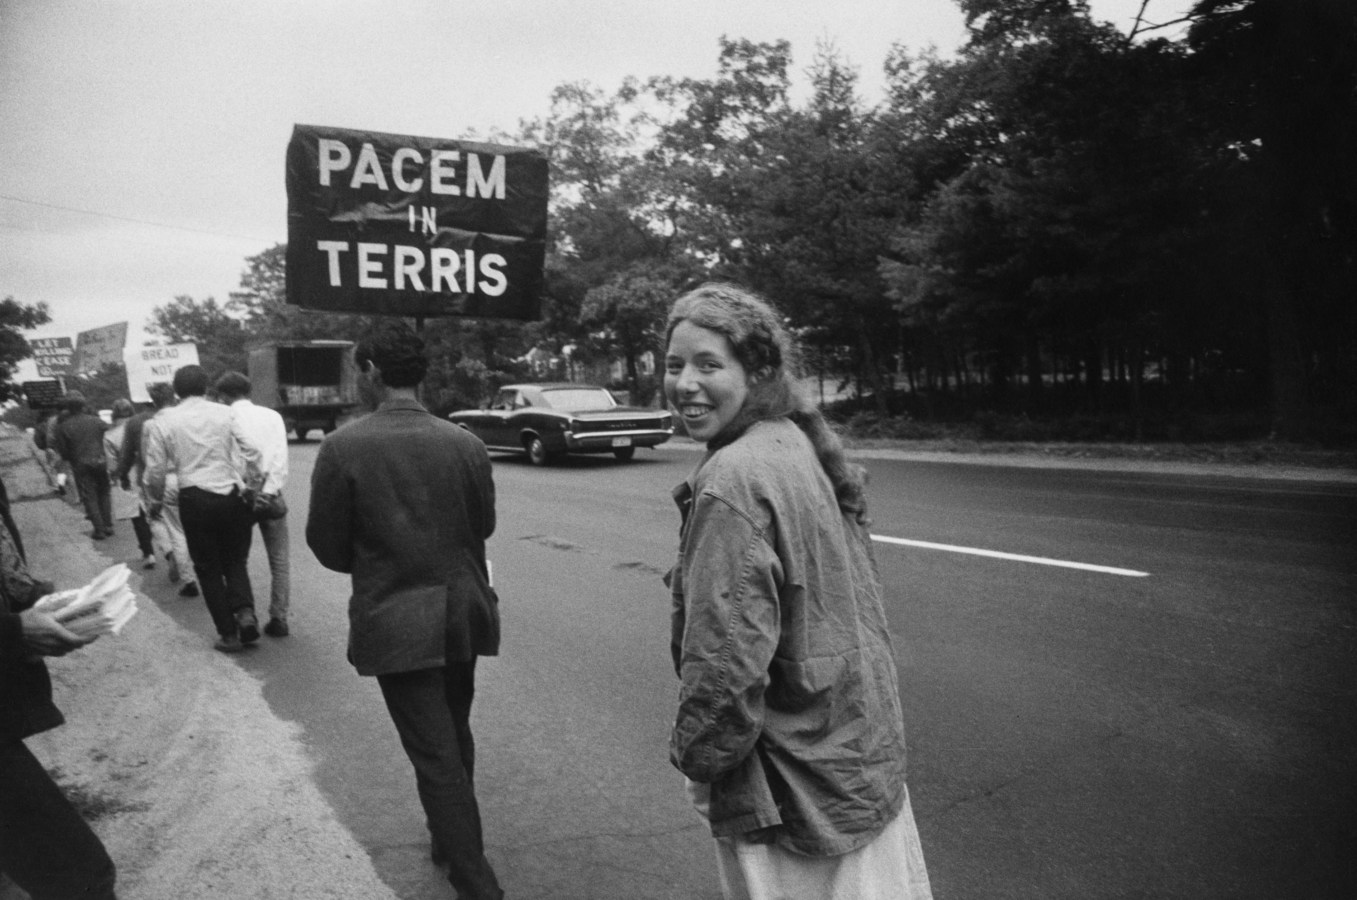 Black-and-white photograph of a woman smiling turning around mid-step following a man with a sign reading PACEM IN TERRIS in a line of people holding signs